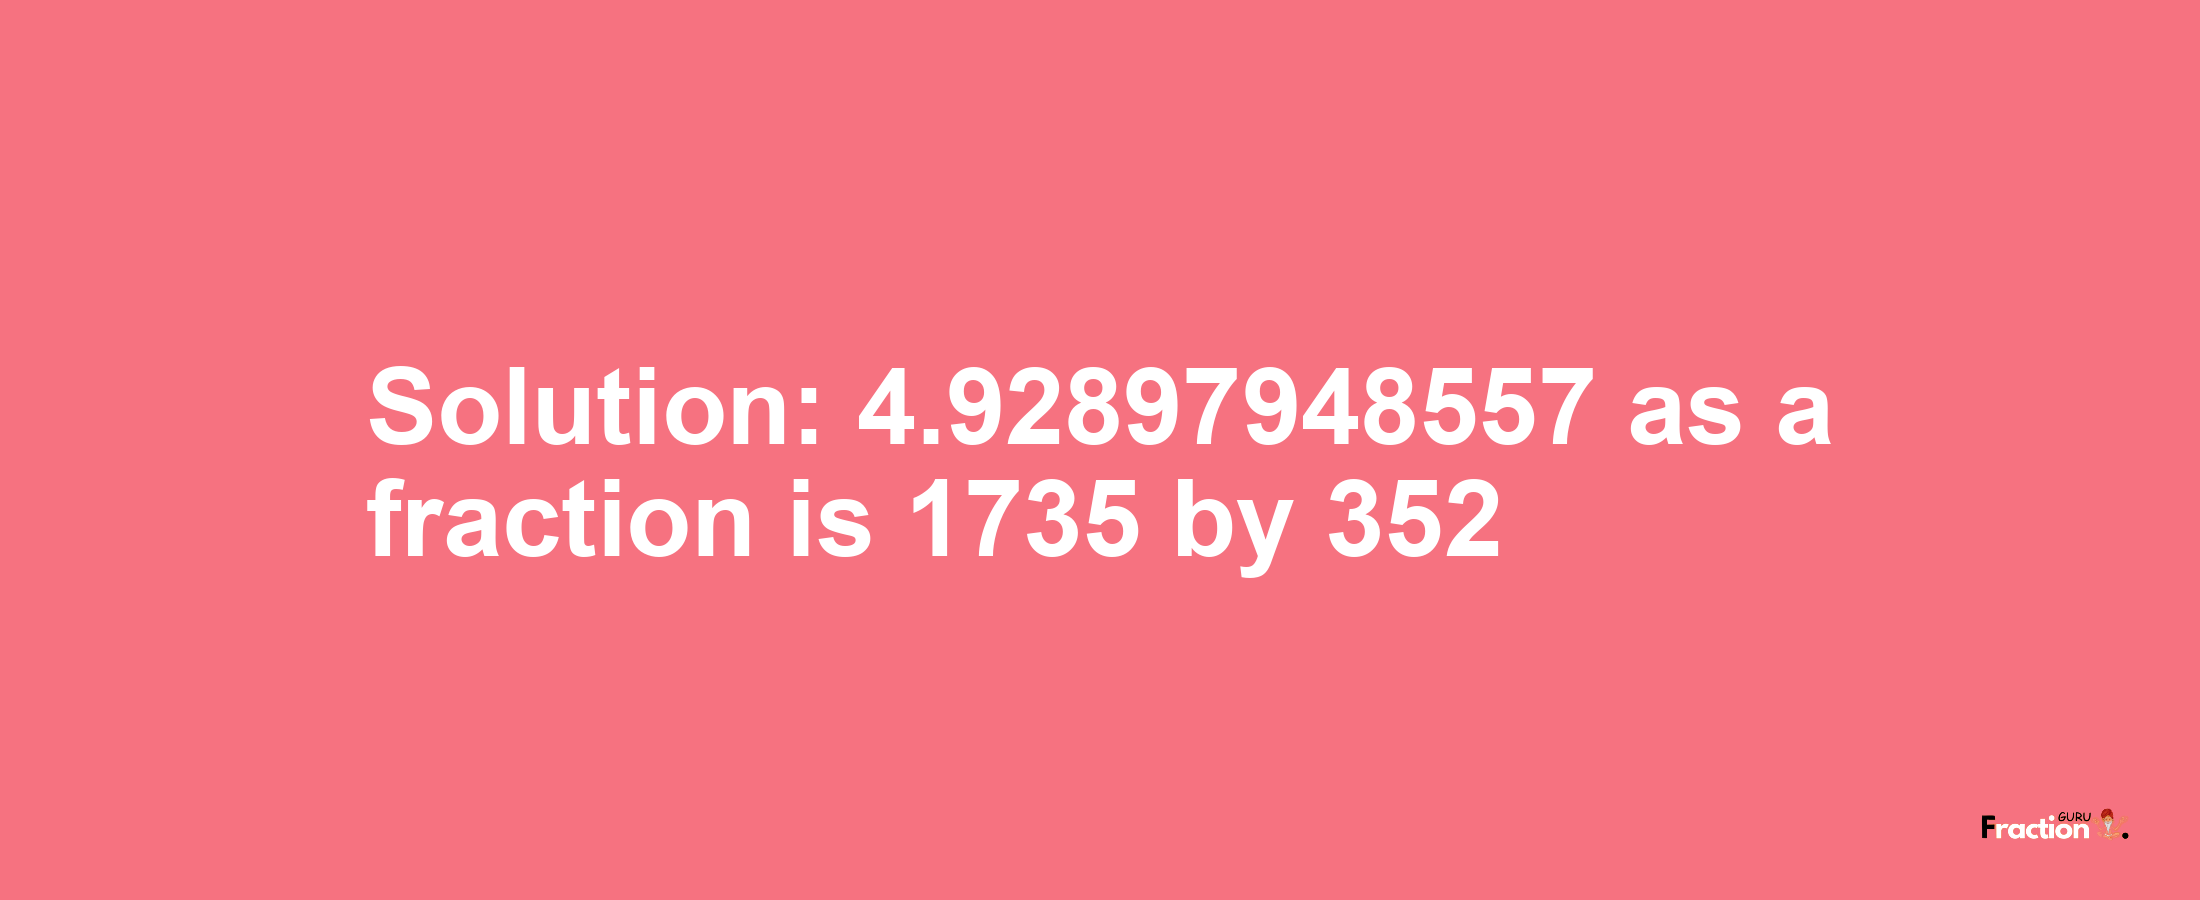 Solution:4.92897948557 as a fraction is 1735/352